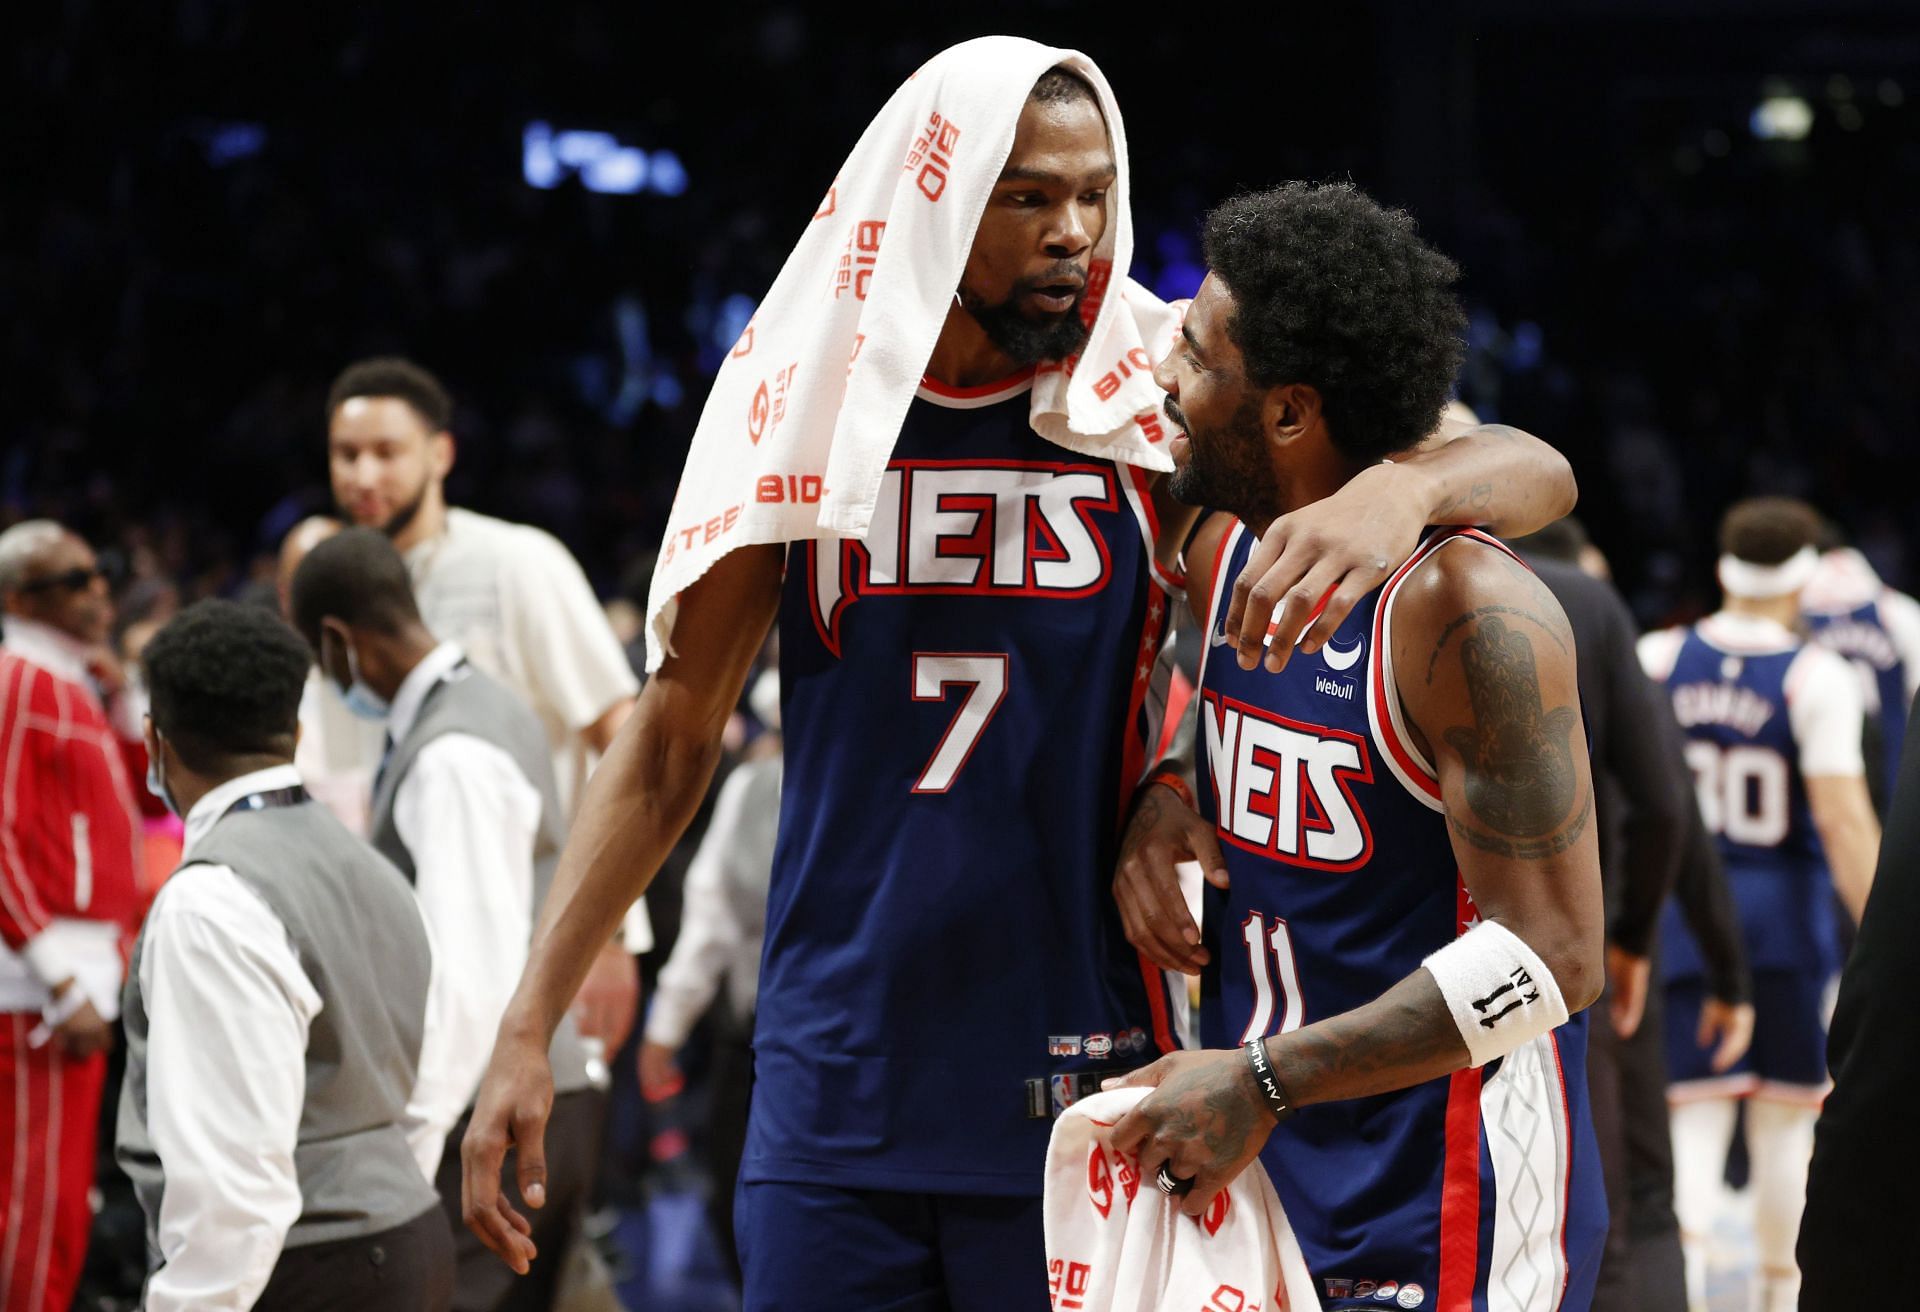 With no straightforward trades on the table for Irving and Durant, both are likely to remain in Nets uniforms.